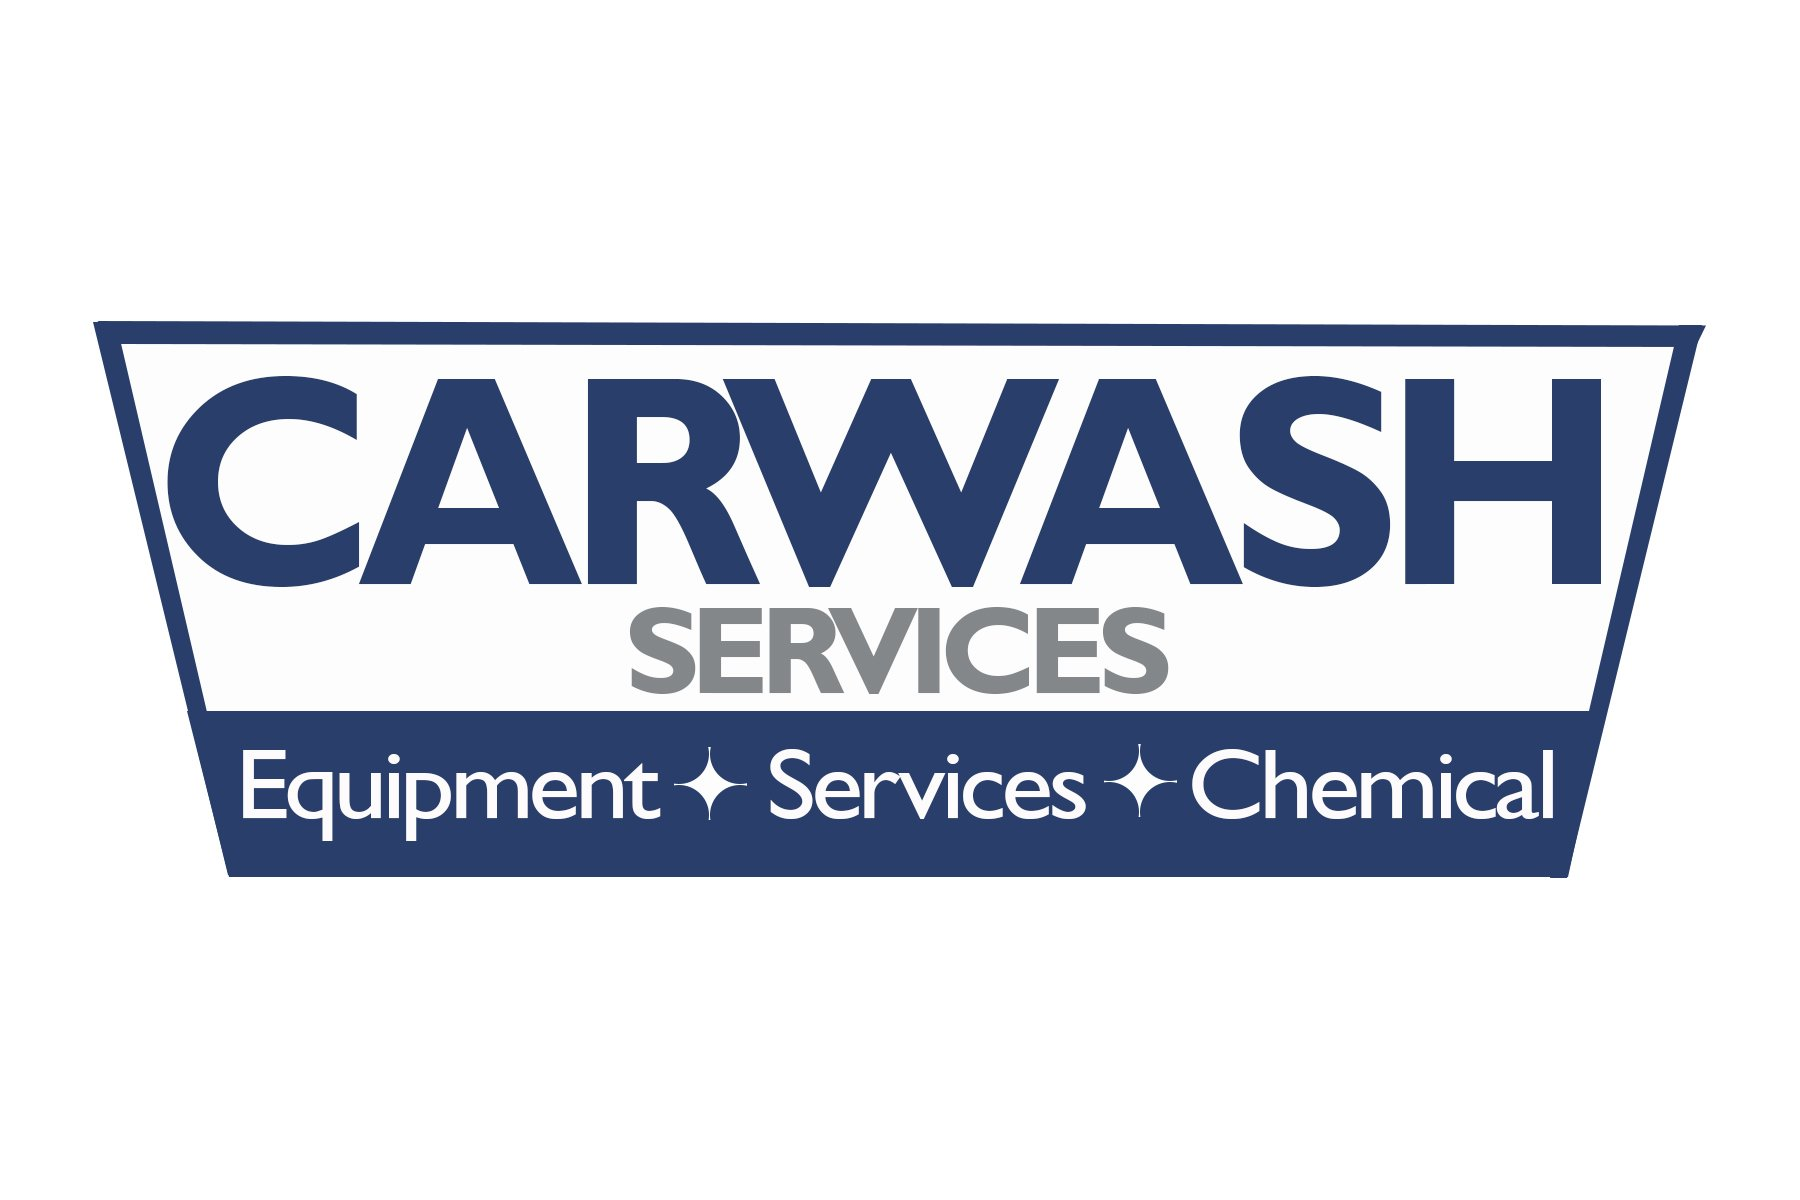  CARWASH SERVICES EQUIPMENT SERVICE CHEMICAL